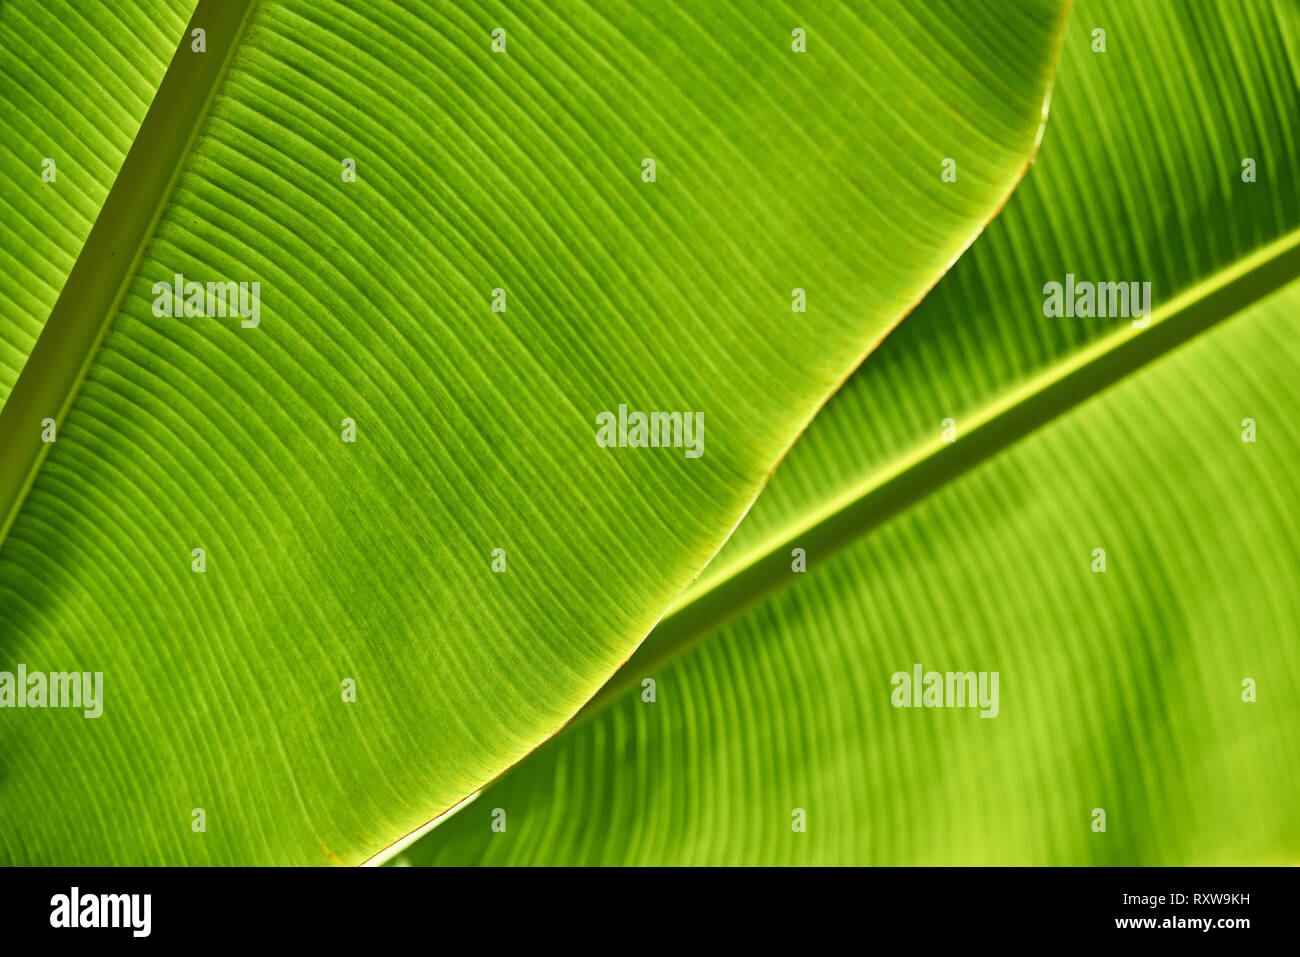 Textured green leaves of a banana tree. Sun is shining onto them from behind. Closeup horizontal photo. Stock Photo